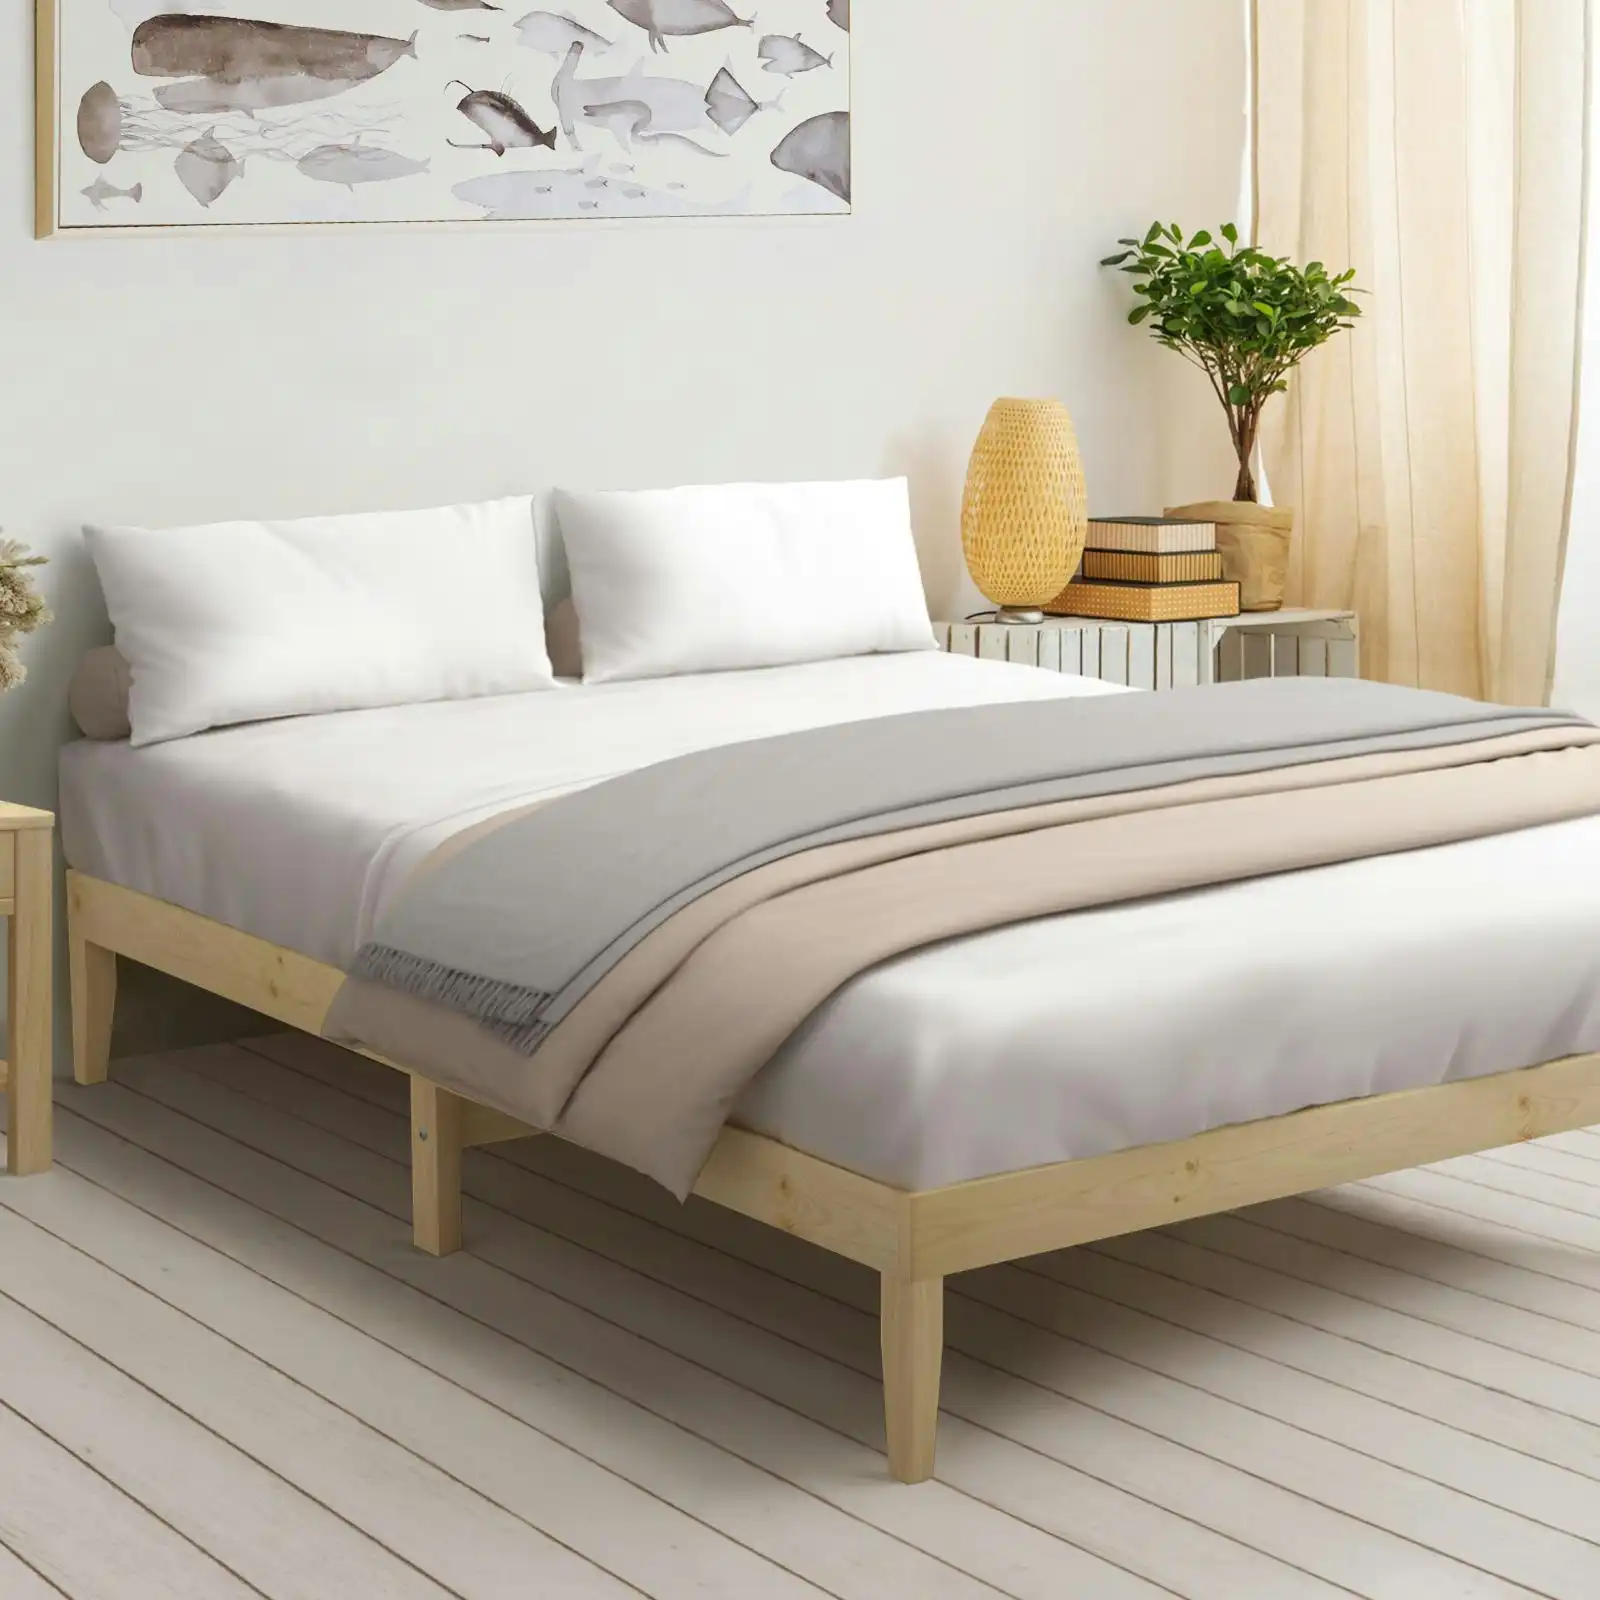 Oikiture Bed Frame King Size Wooden Bed Base A8